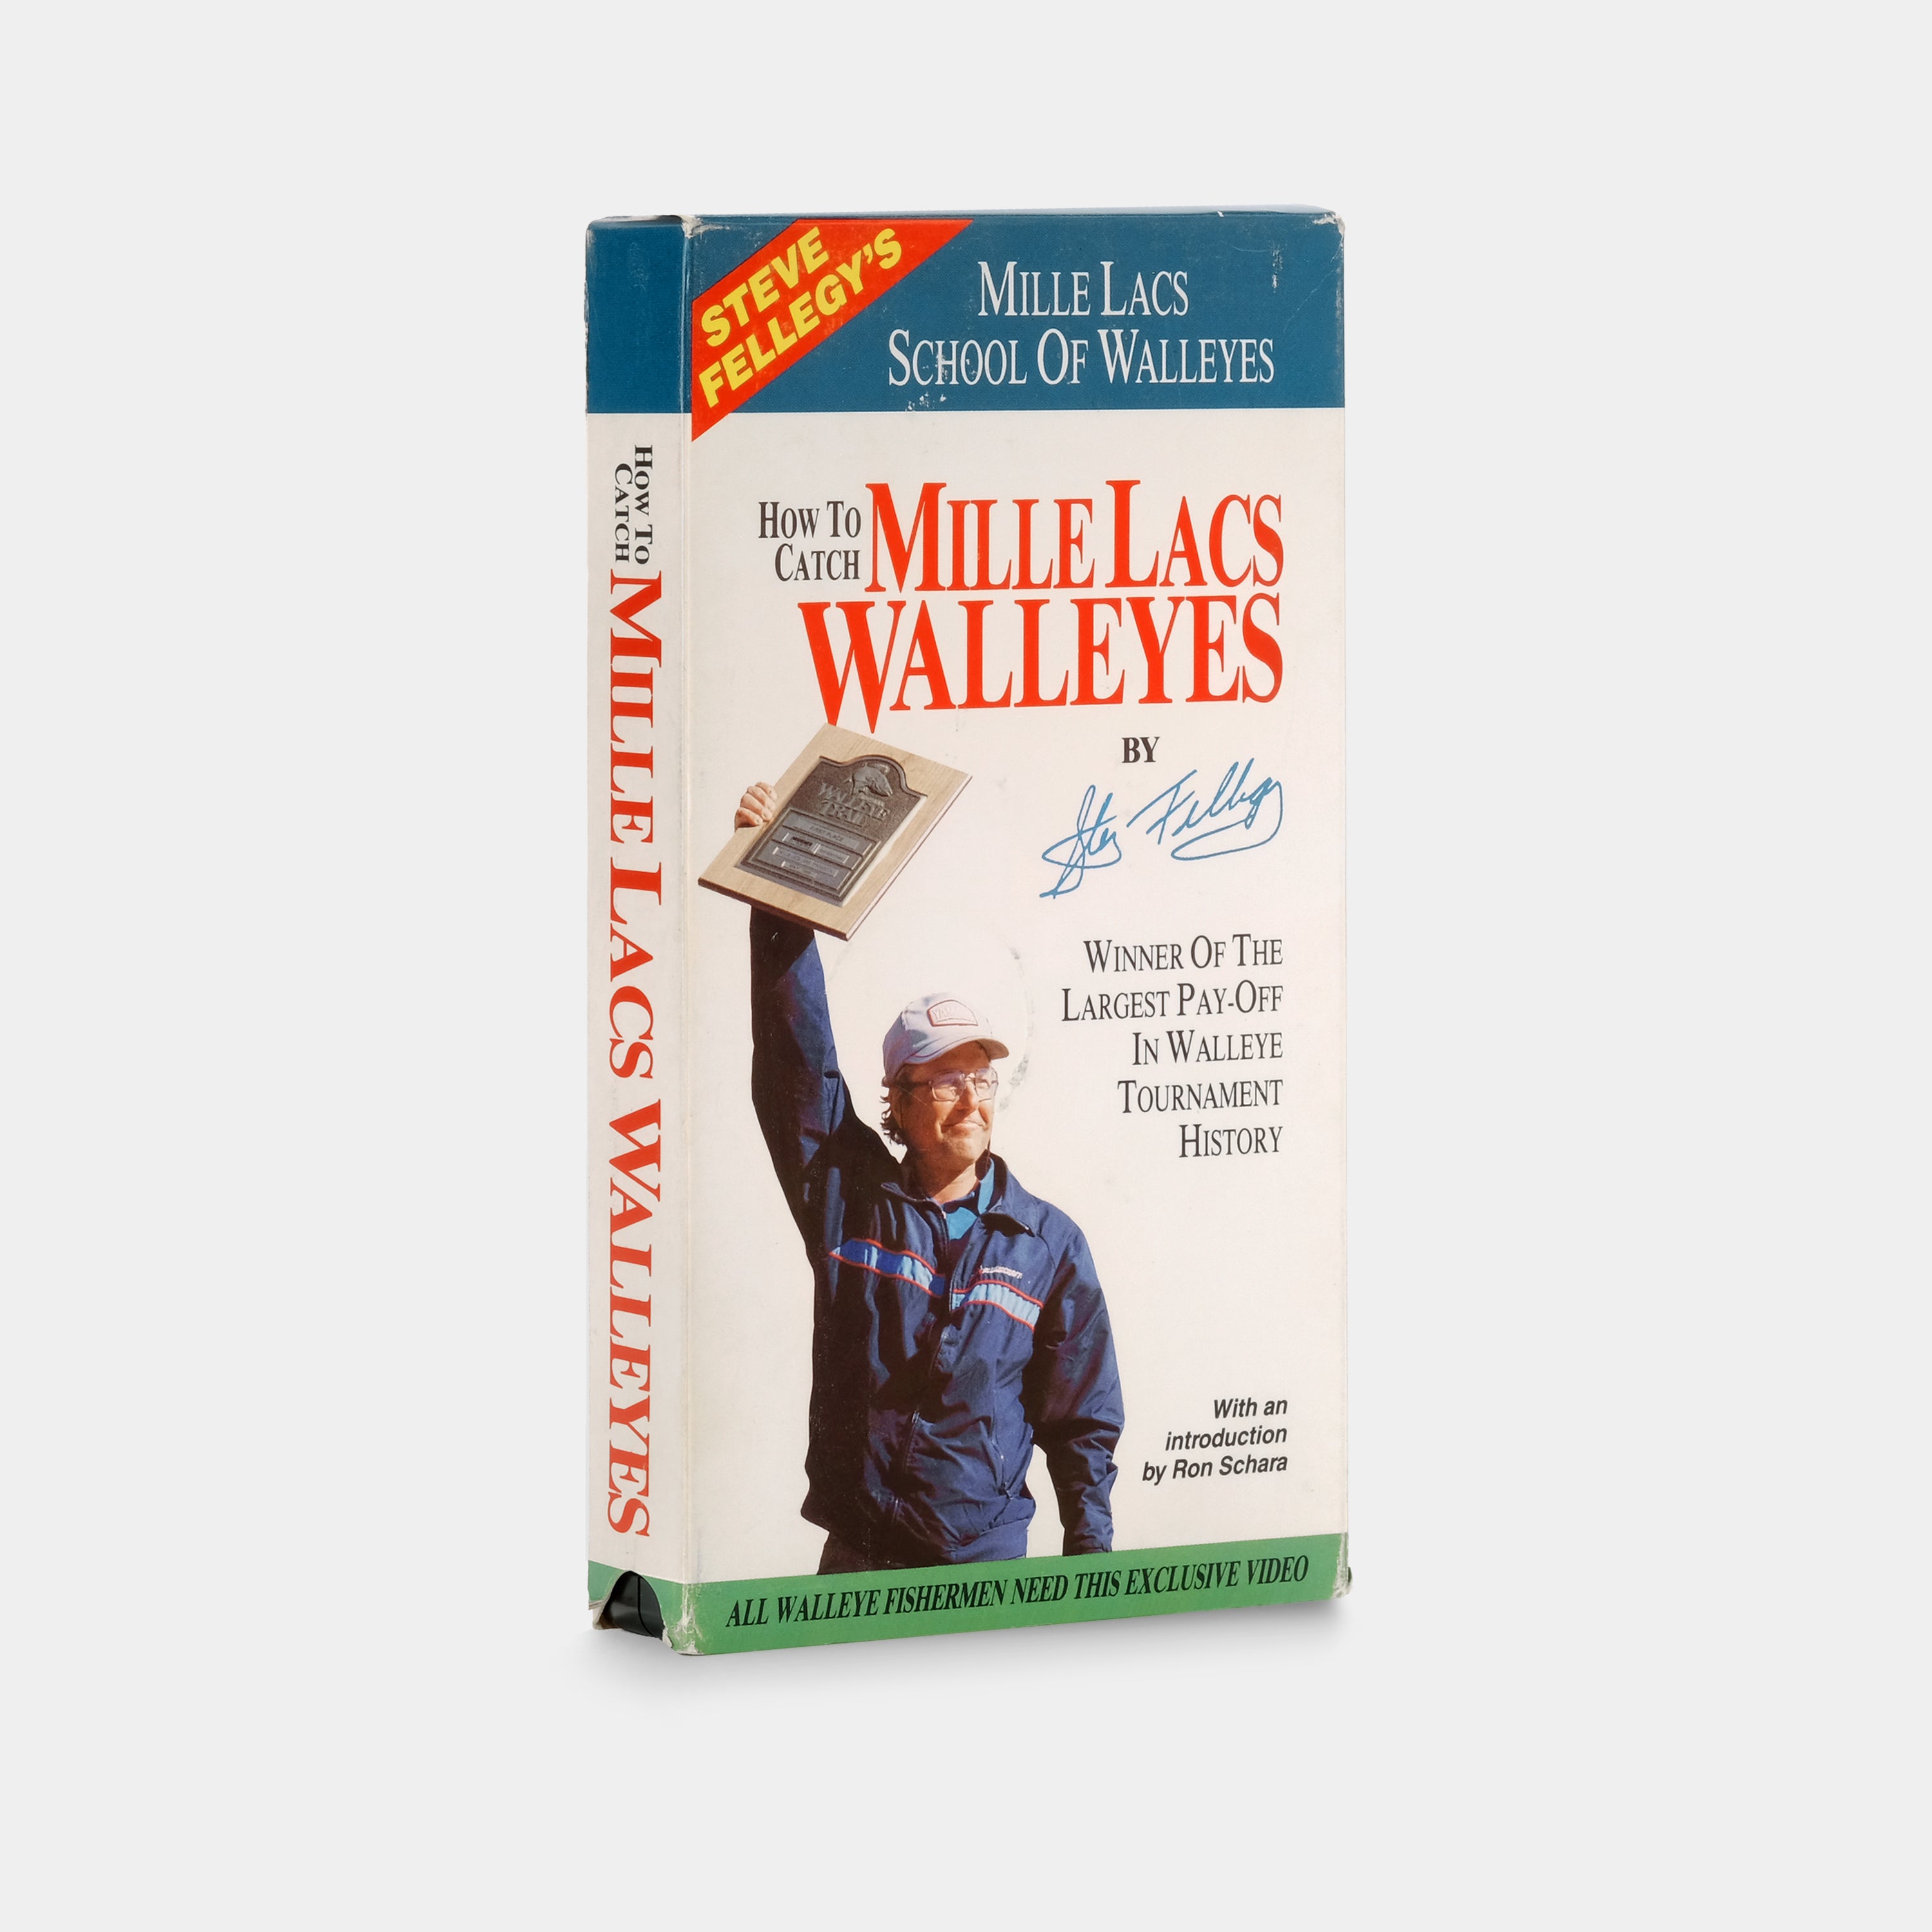 How To Catch Mille Lacs Walleyes VHS Tape